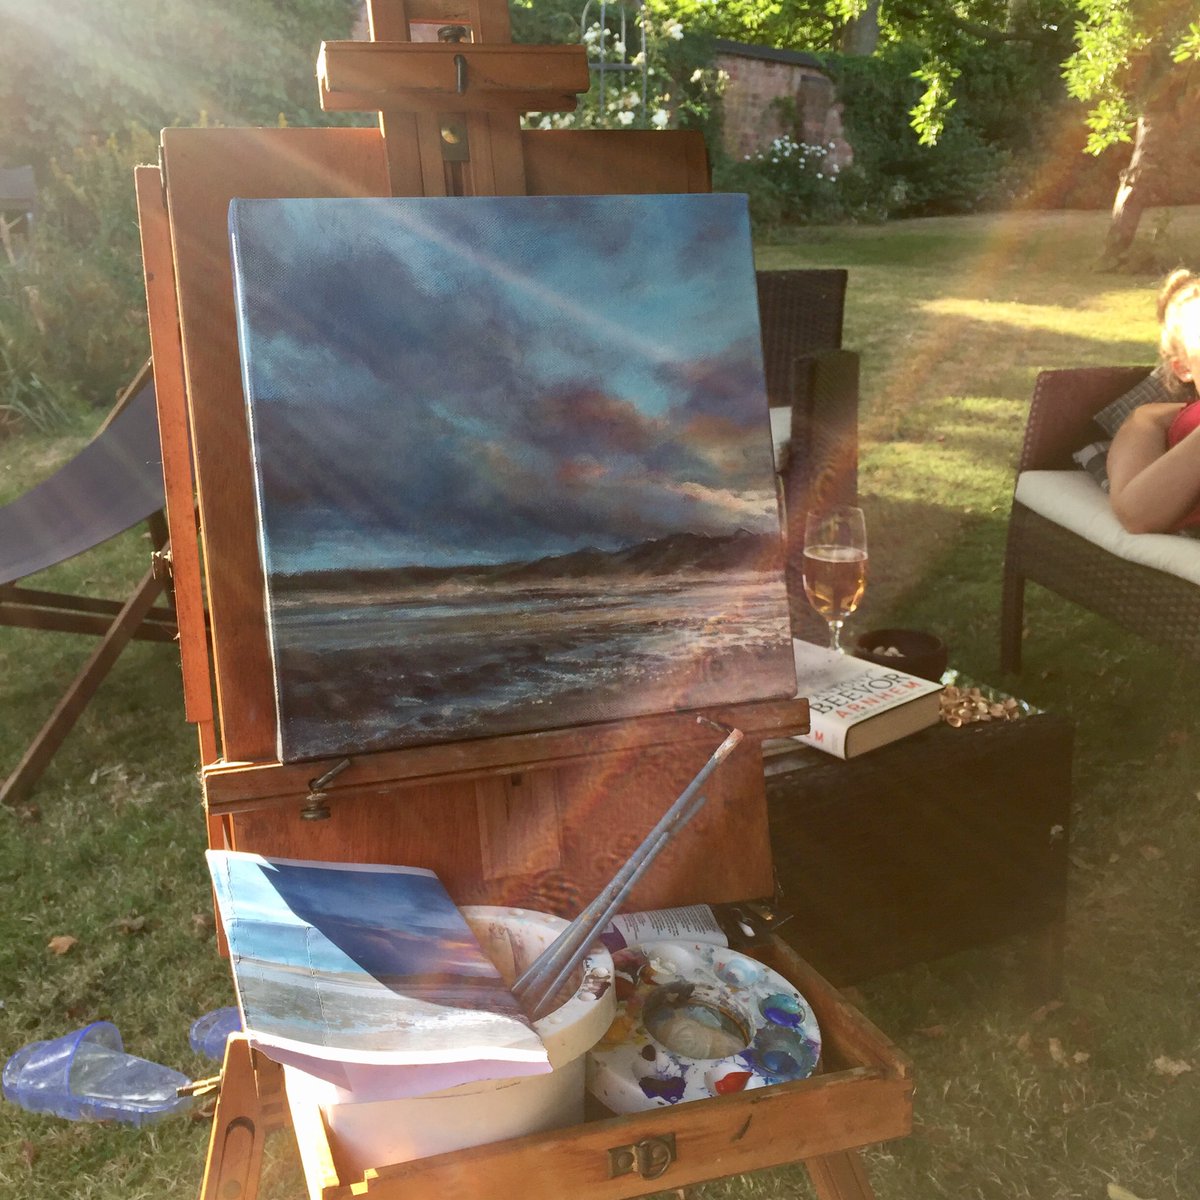 Painting under the Apple trees to keep cool #art #playing #painting #easel  #acrylicpainting #workshops #art #paintingoutdoors